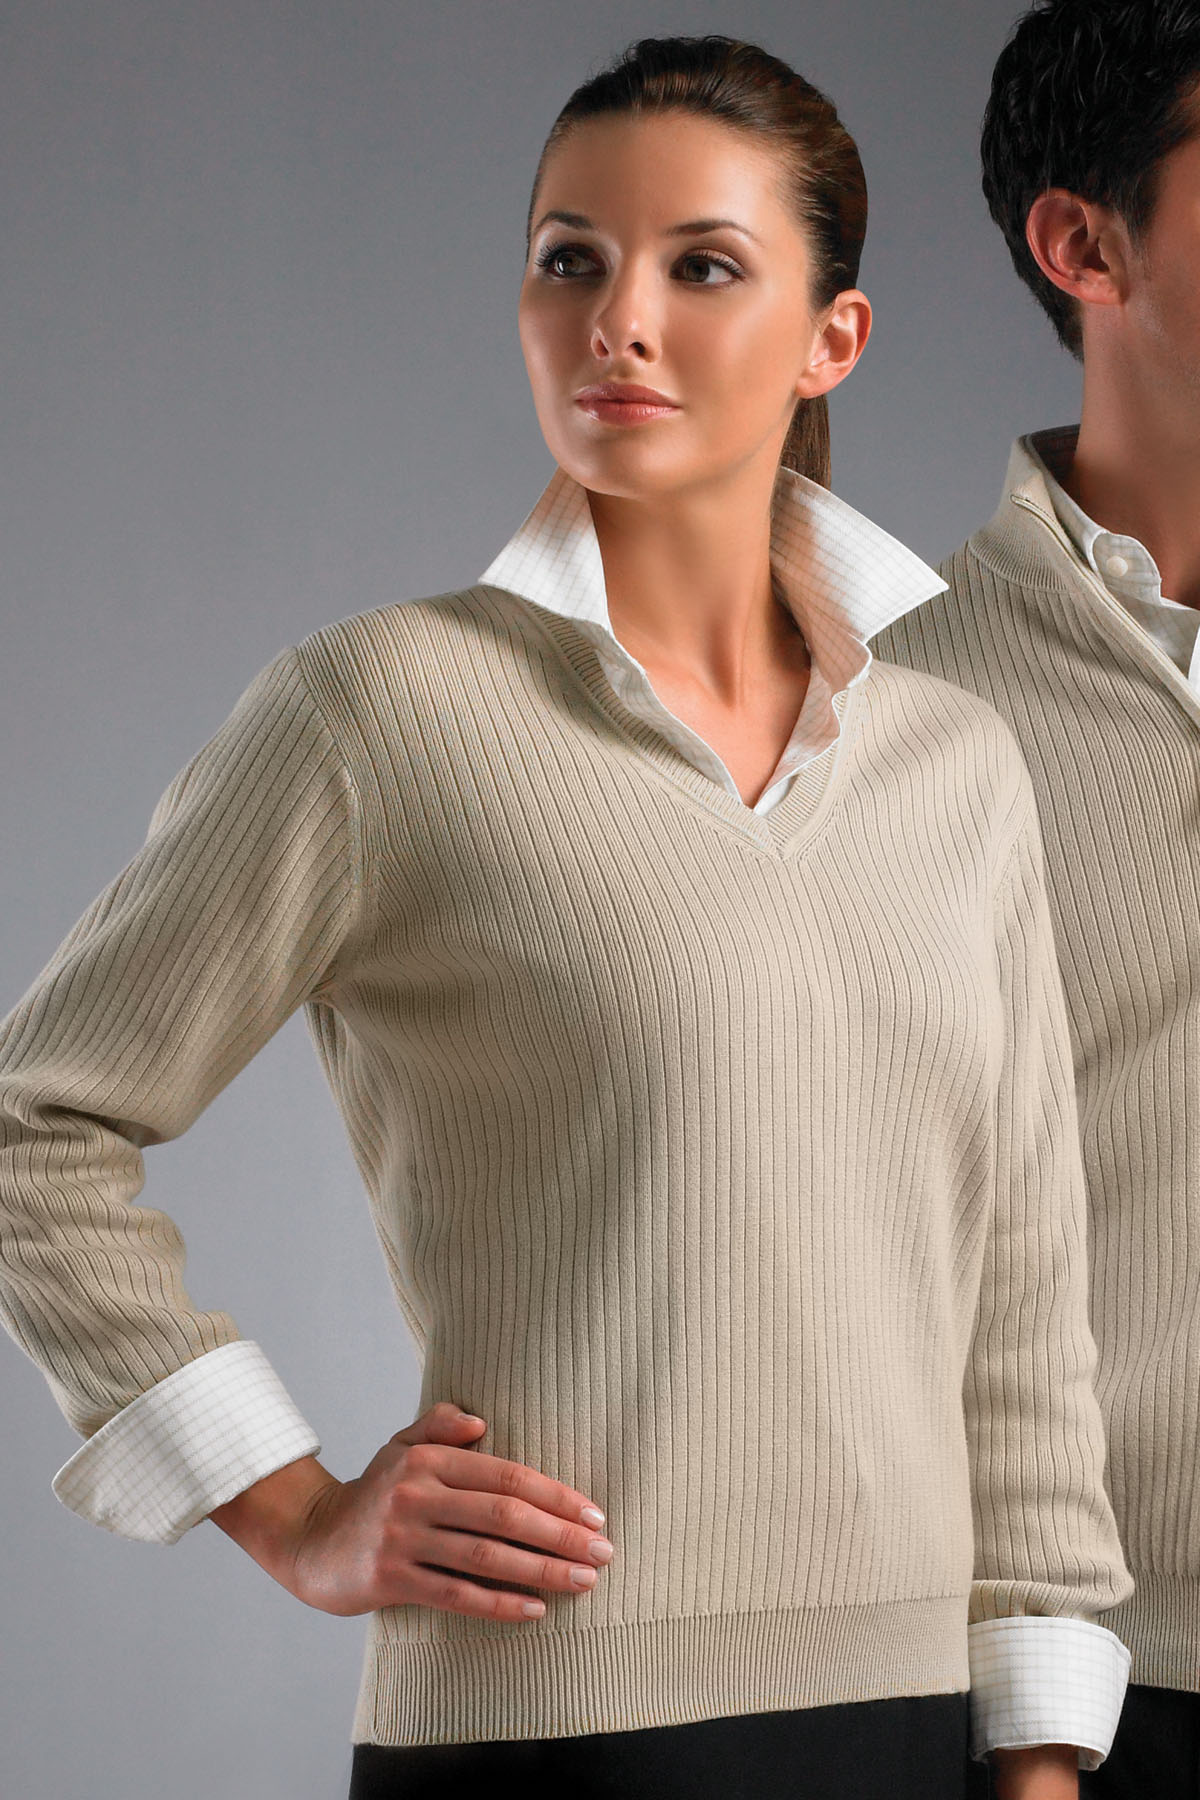 Greg Norman WNS9S420 - Women's V-Neck Drop-Needle Sweater